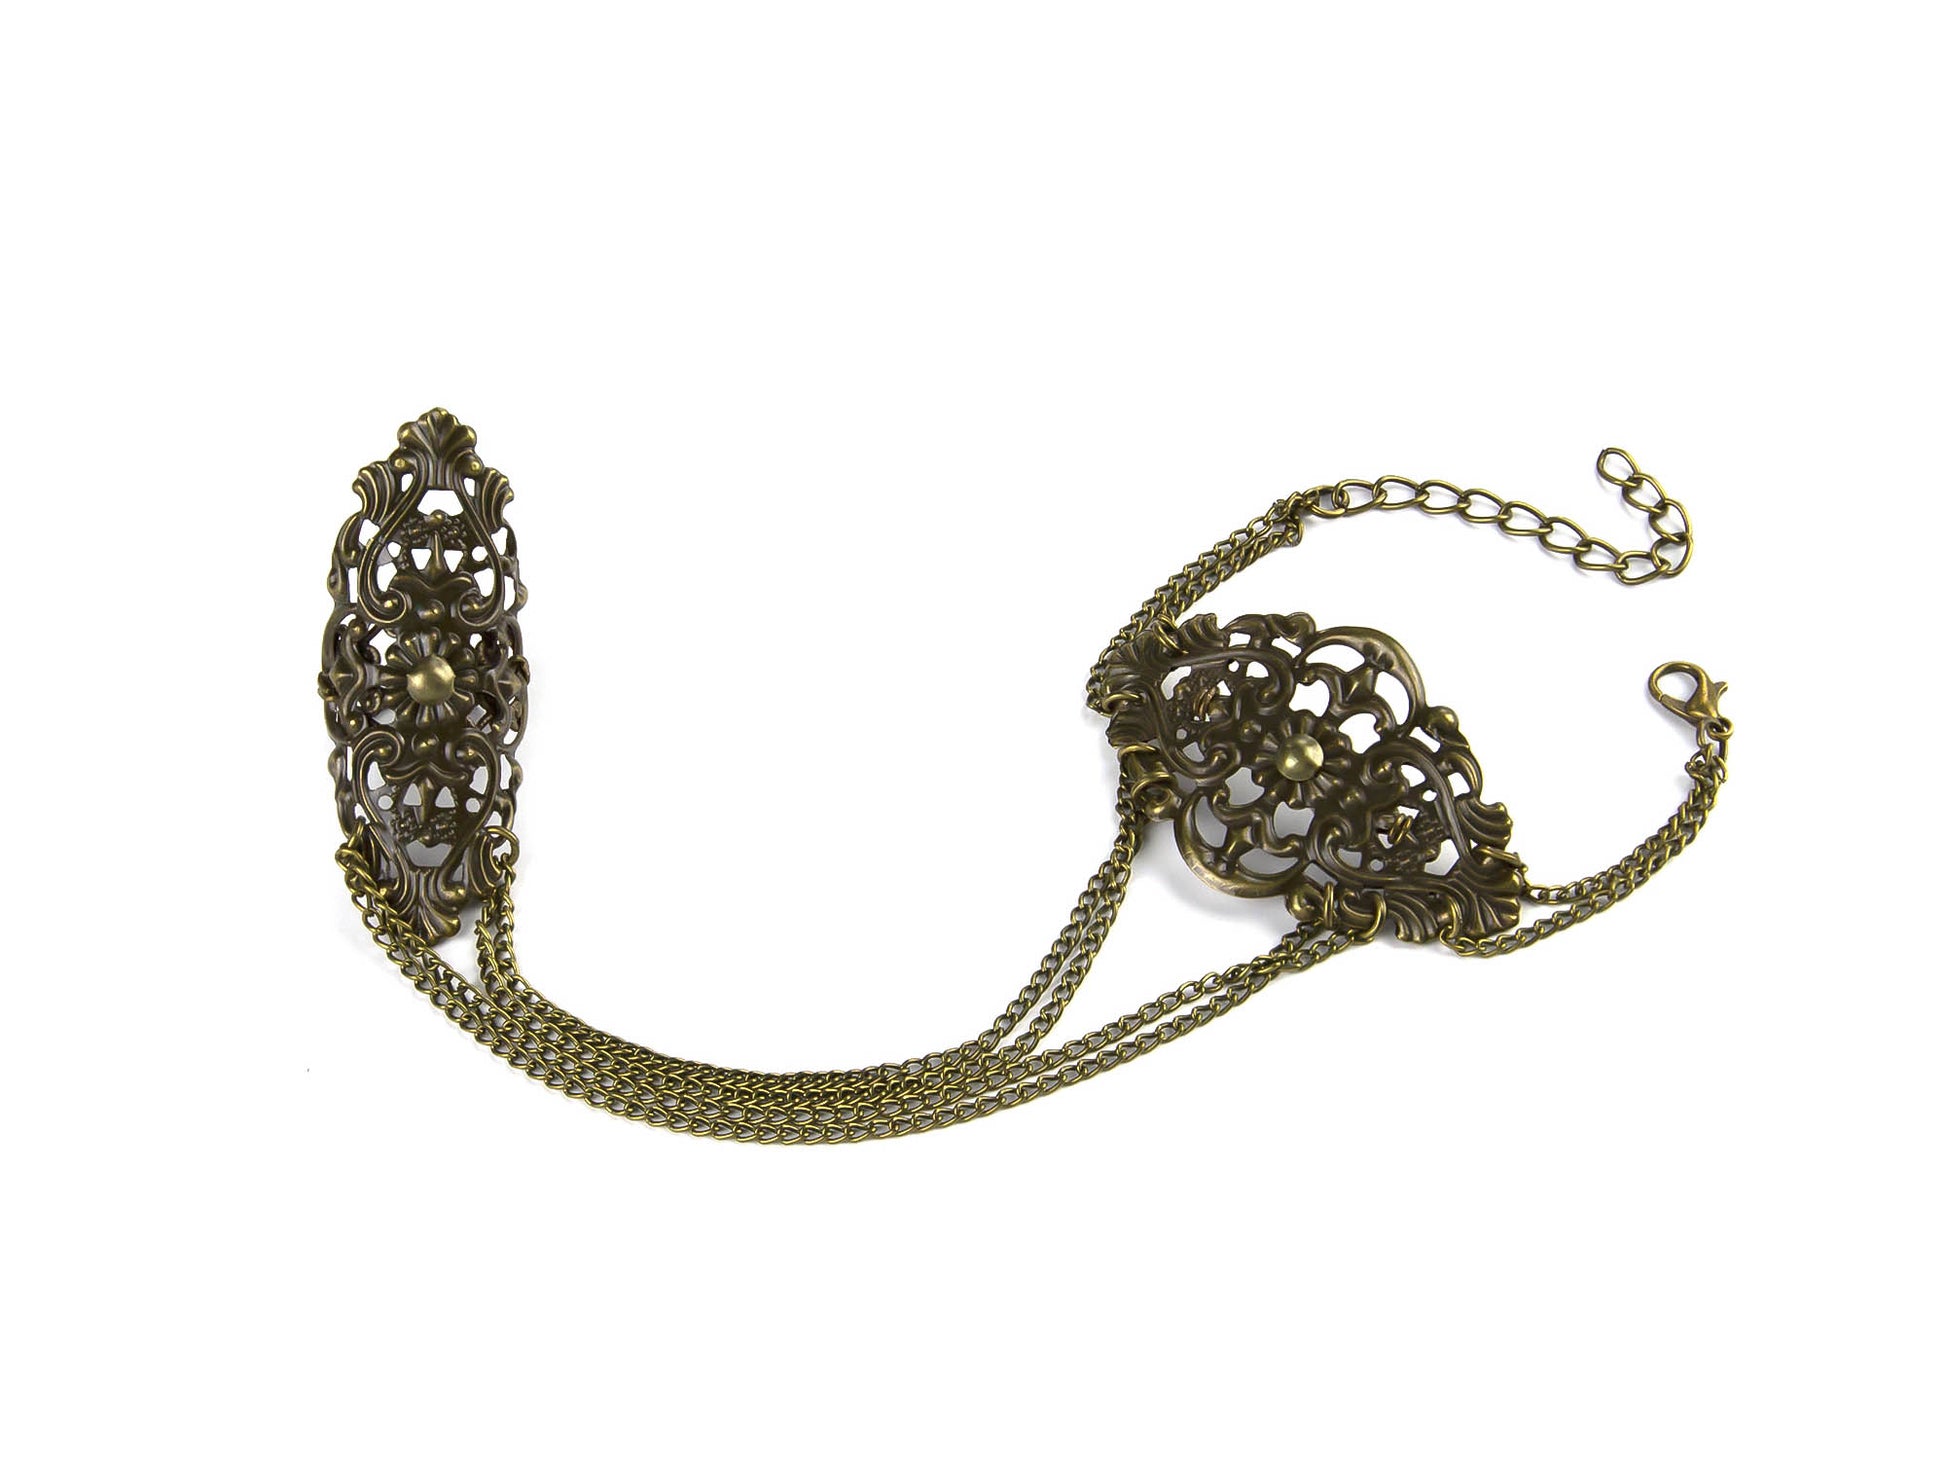 Sophisticated bronze hand chain bracelet featuring ornate gothic details, perfect for elevating gothic fashion or making a statement in dark avant-garde jewelry collections.